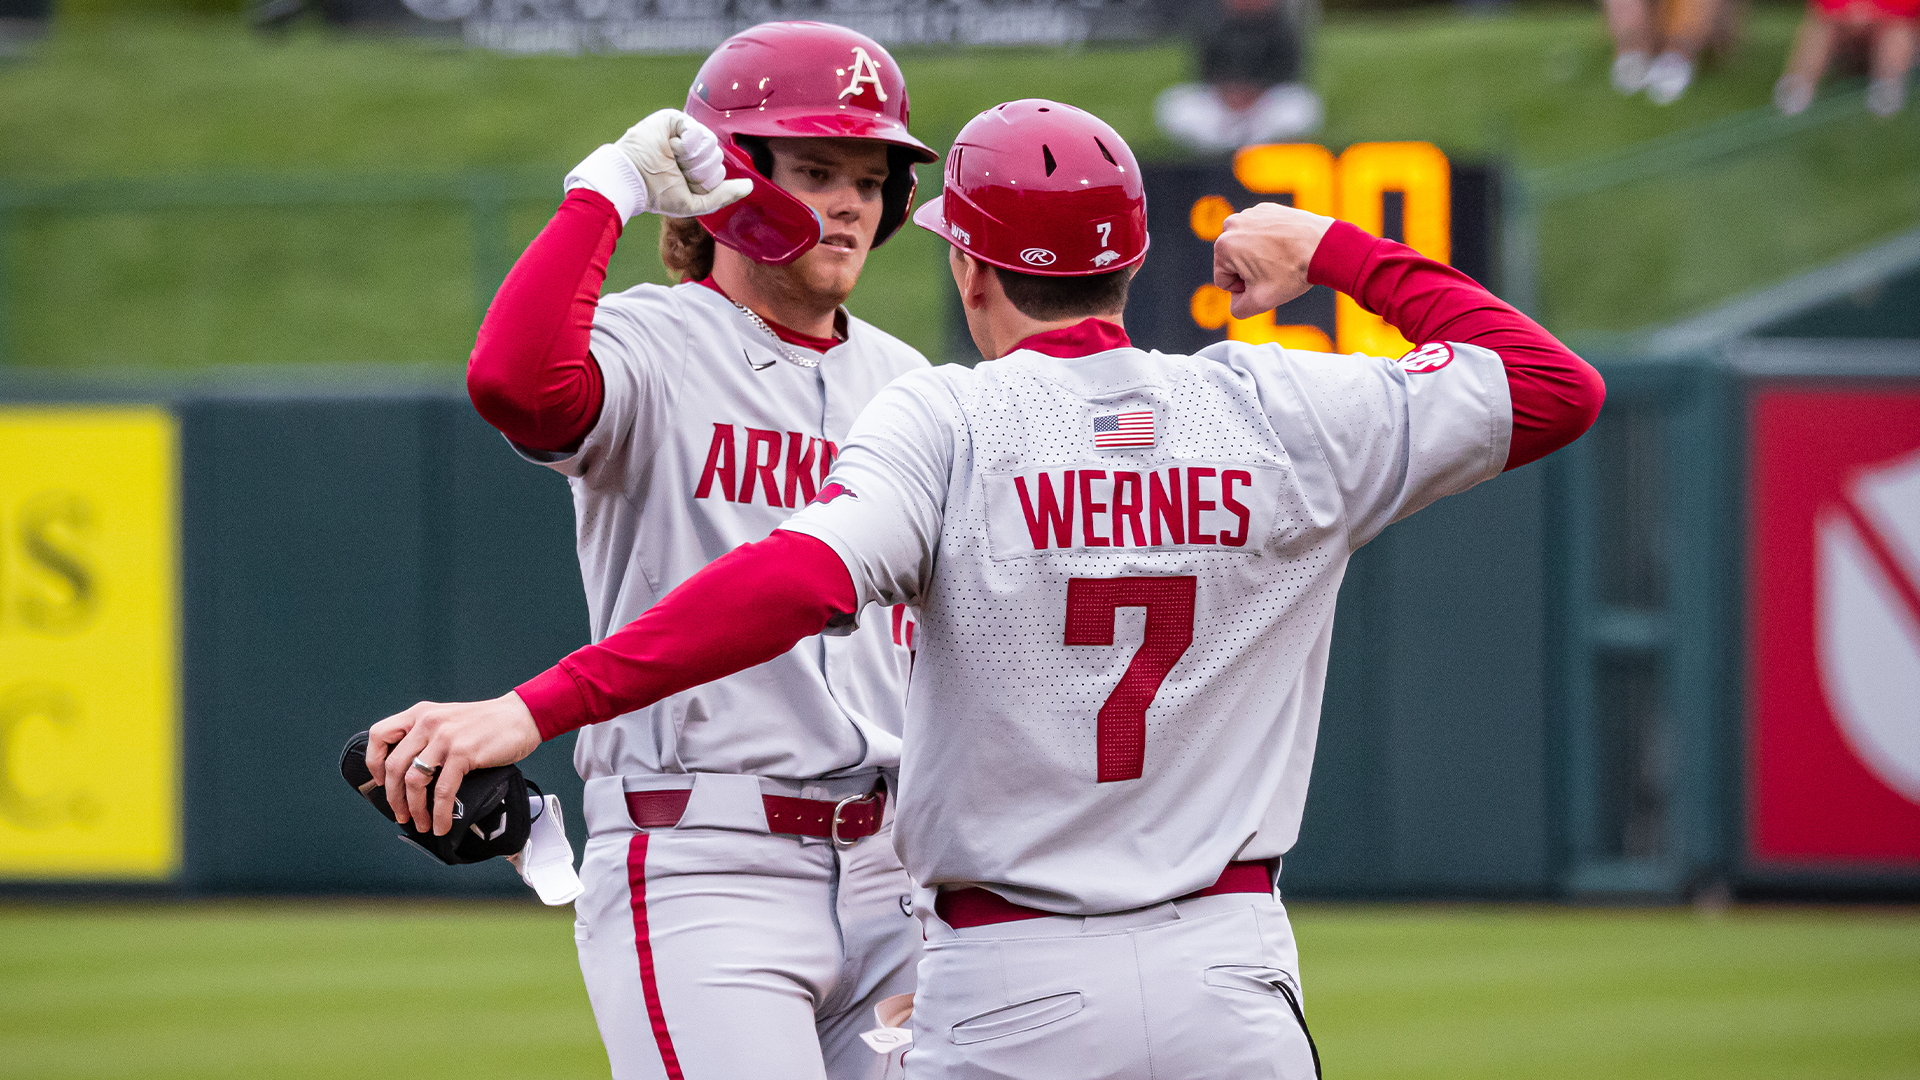 Texas A&M baseball goes on the offensive in midweek win, Sports